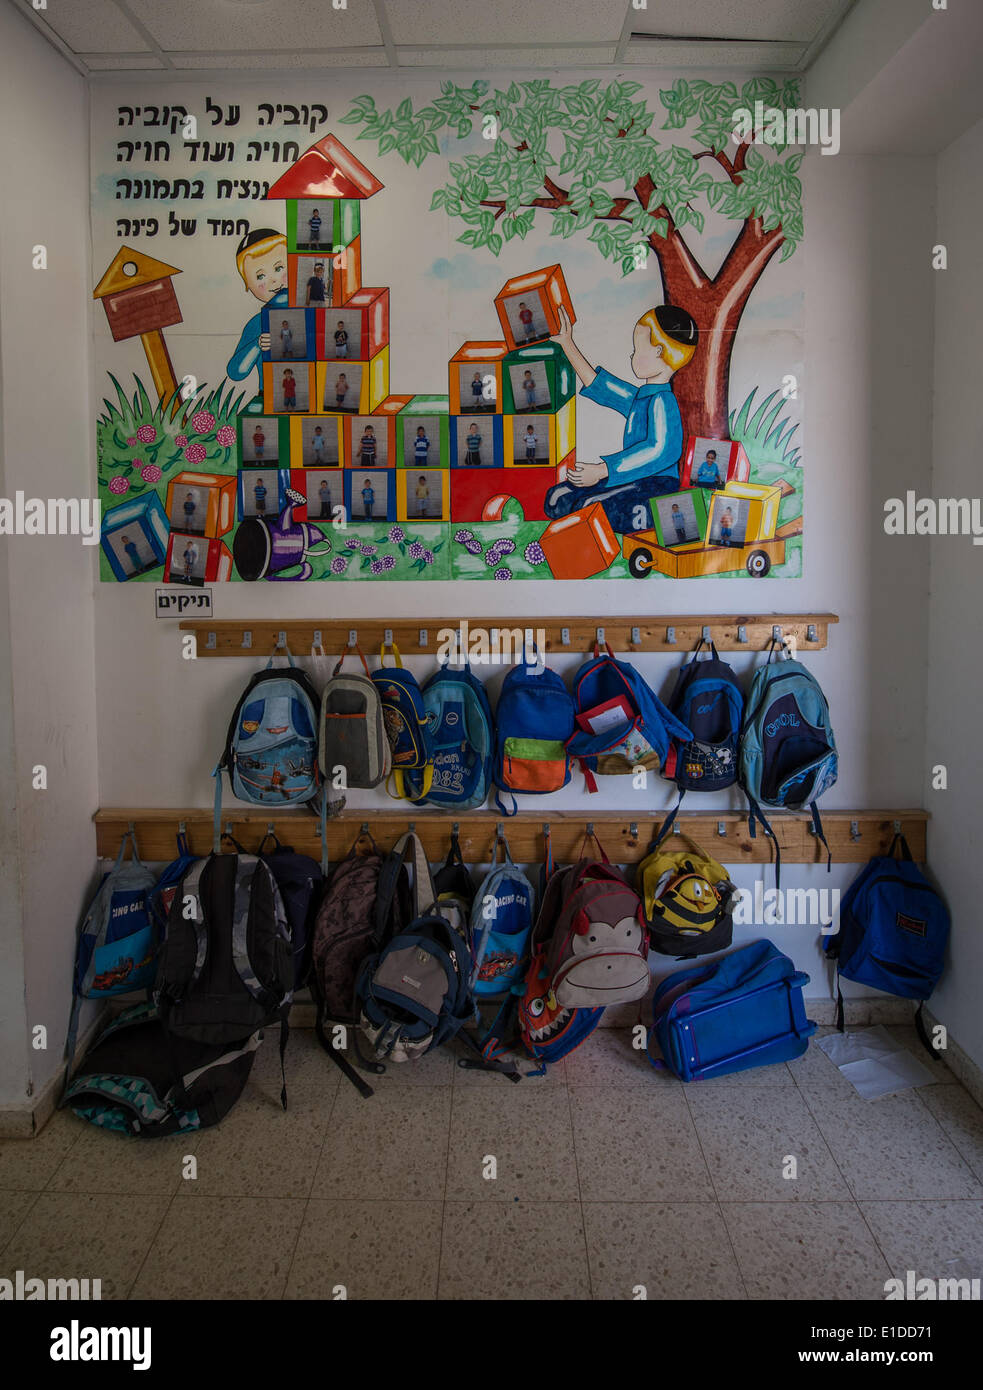 (140601) -- JERUSALEM, June 1, 2014 (Xinhua) -- Orthodox Jewish pupils' bags are seen outside a classroom of Torat Moshe elementary school in Beit Shemesh, about 20 km from Jerusalem, on May 29, 2014. Tzviel Noyman is an Israeli Ultra-Orthodox boy in a family with six children, three boys and three girls. He is ten years old this year and a grade three pupil of Torat Moshe elementary school, which is only opened to Jewish children. Tzviel has eight classes each day, including Hebrew, English, mathematics and Jewish religion, which has four classes each day including Talmud, Mishnah and Gemara. Stock Photo